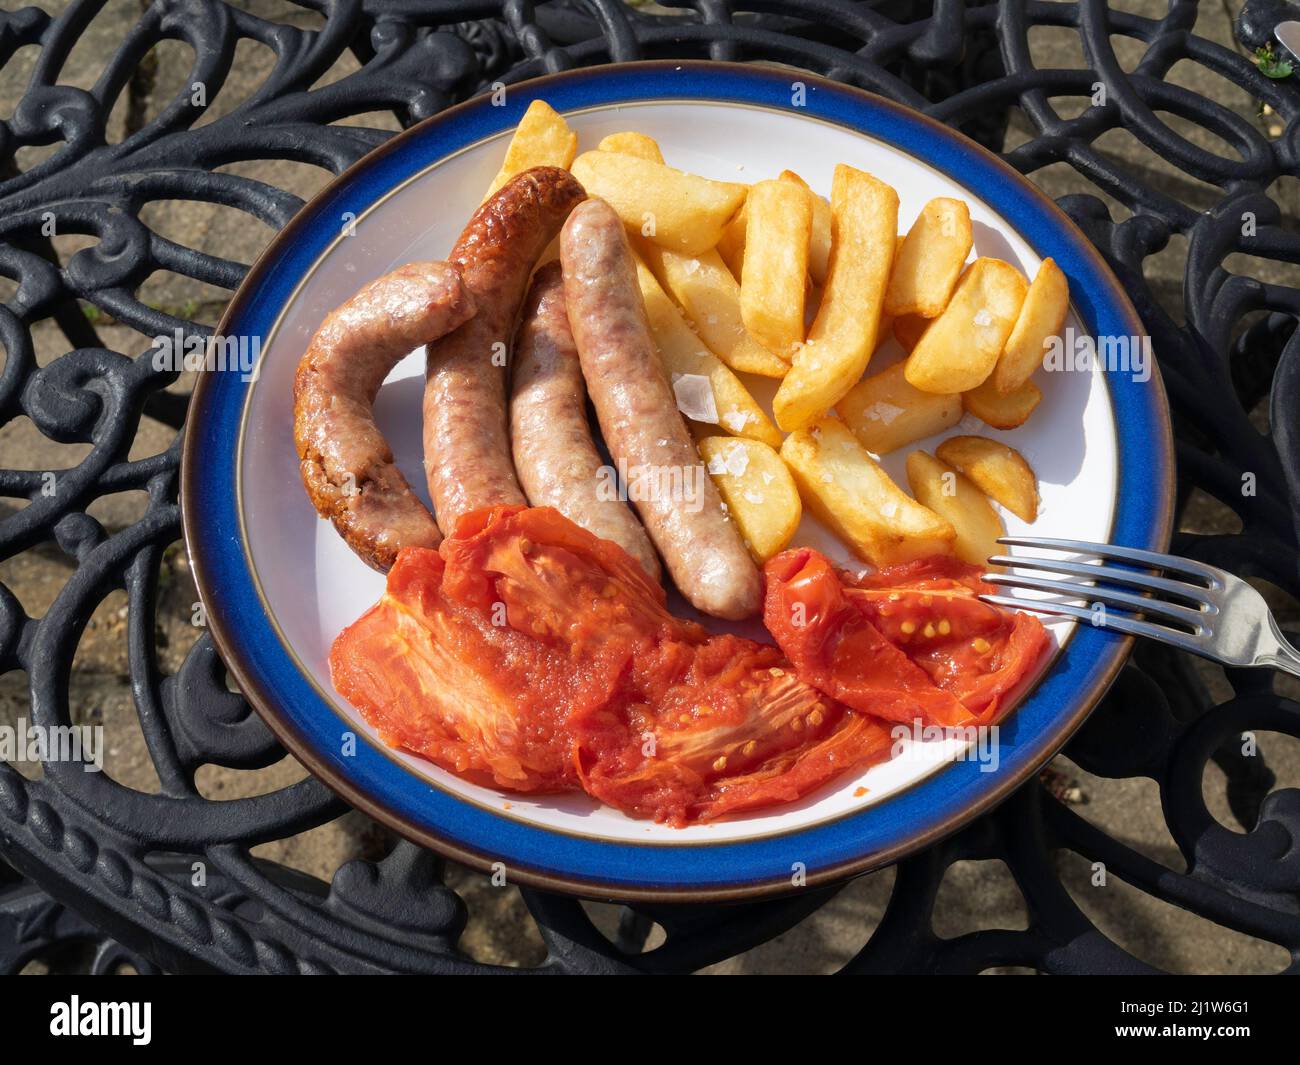 Lunch outdoors with traditional pork sausages, grilled plum tomatoes and potato chips on  blue edged white plate Stock Photo